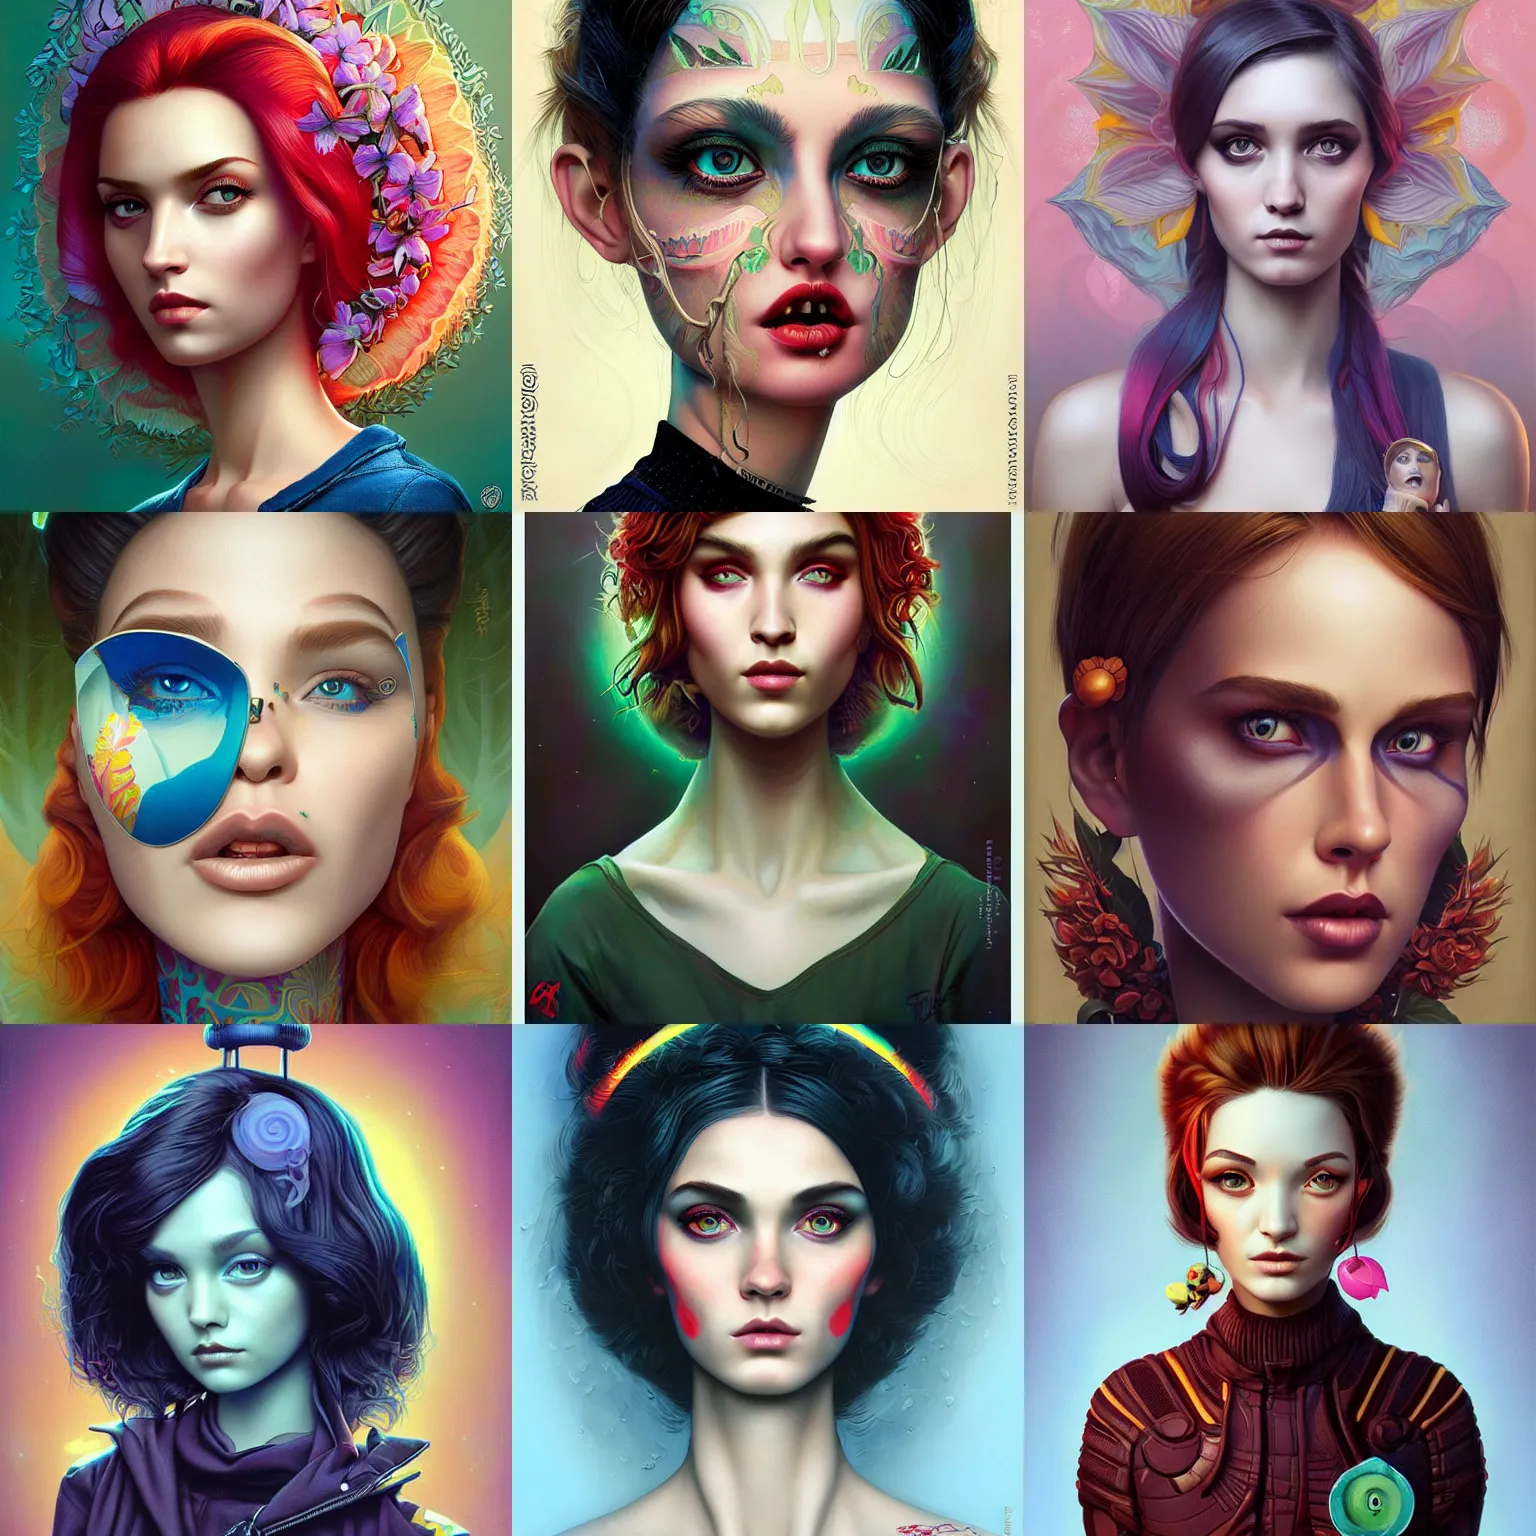 Prompt: Forestpunk valyikre portrait Pixar style, by Tristan Eaton Stanley Artgerm and Tom Bagshaw